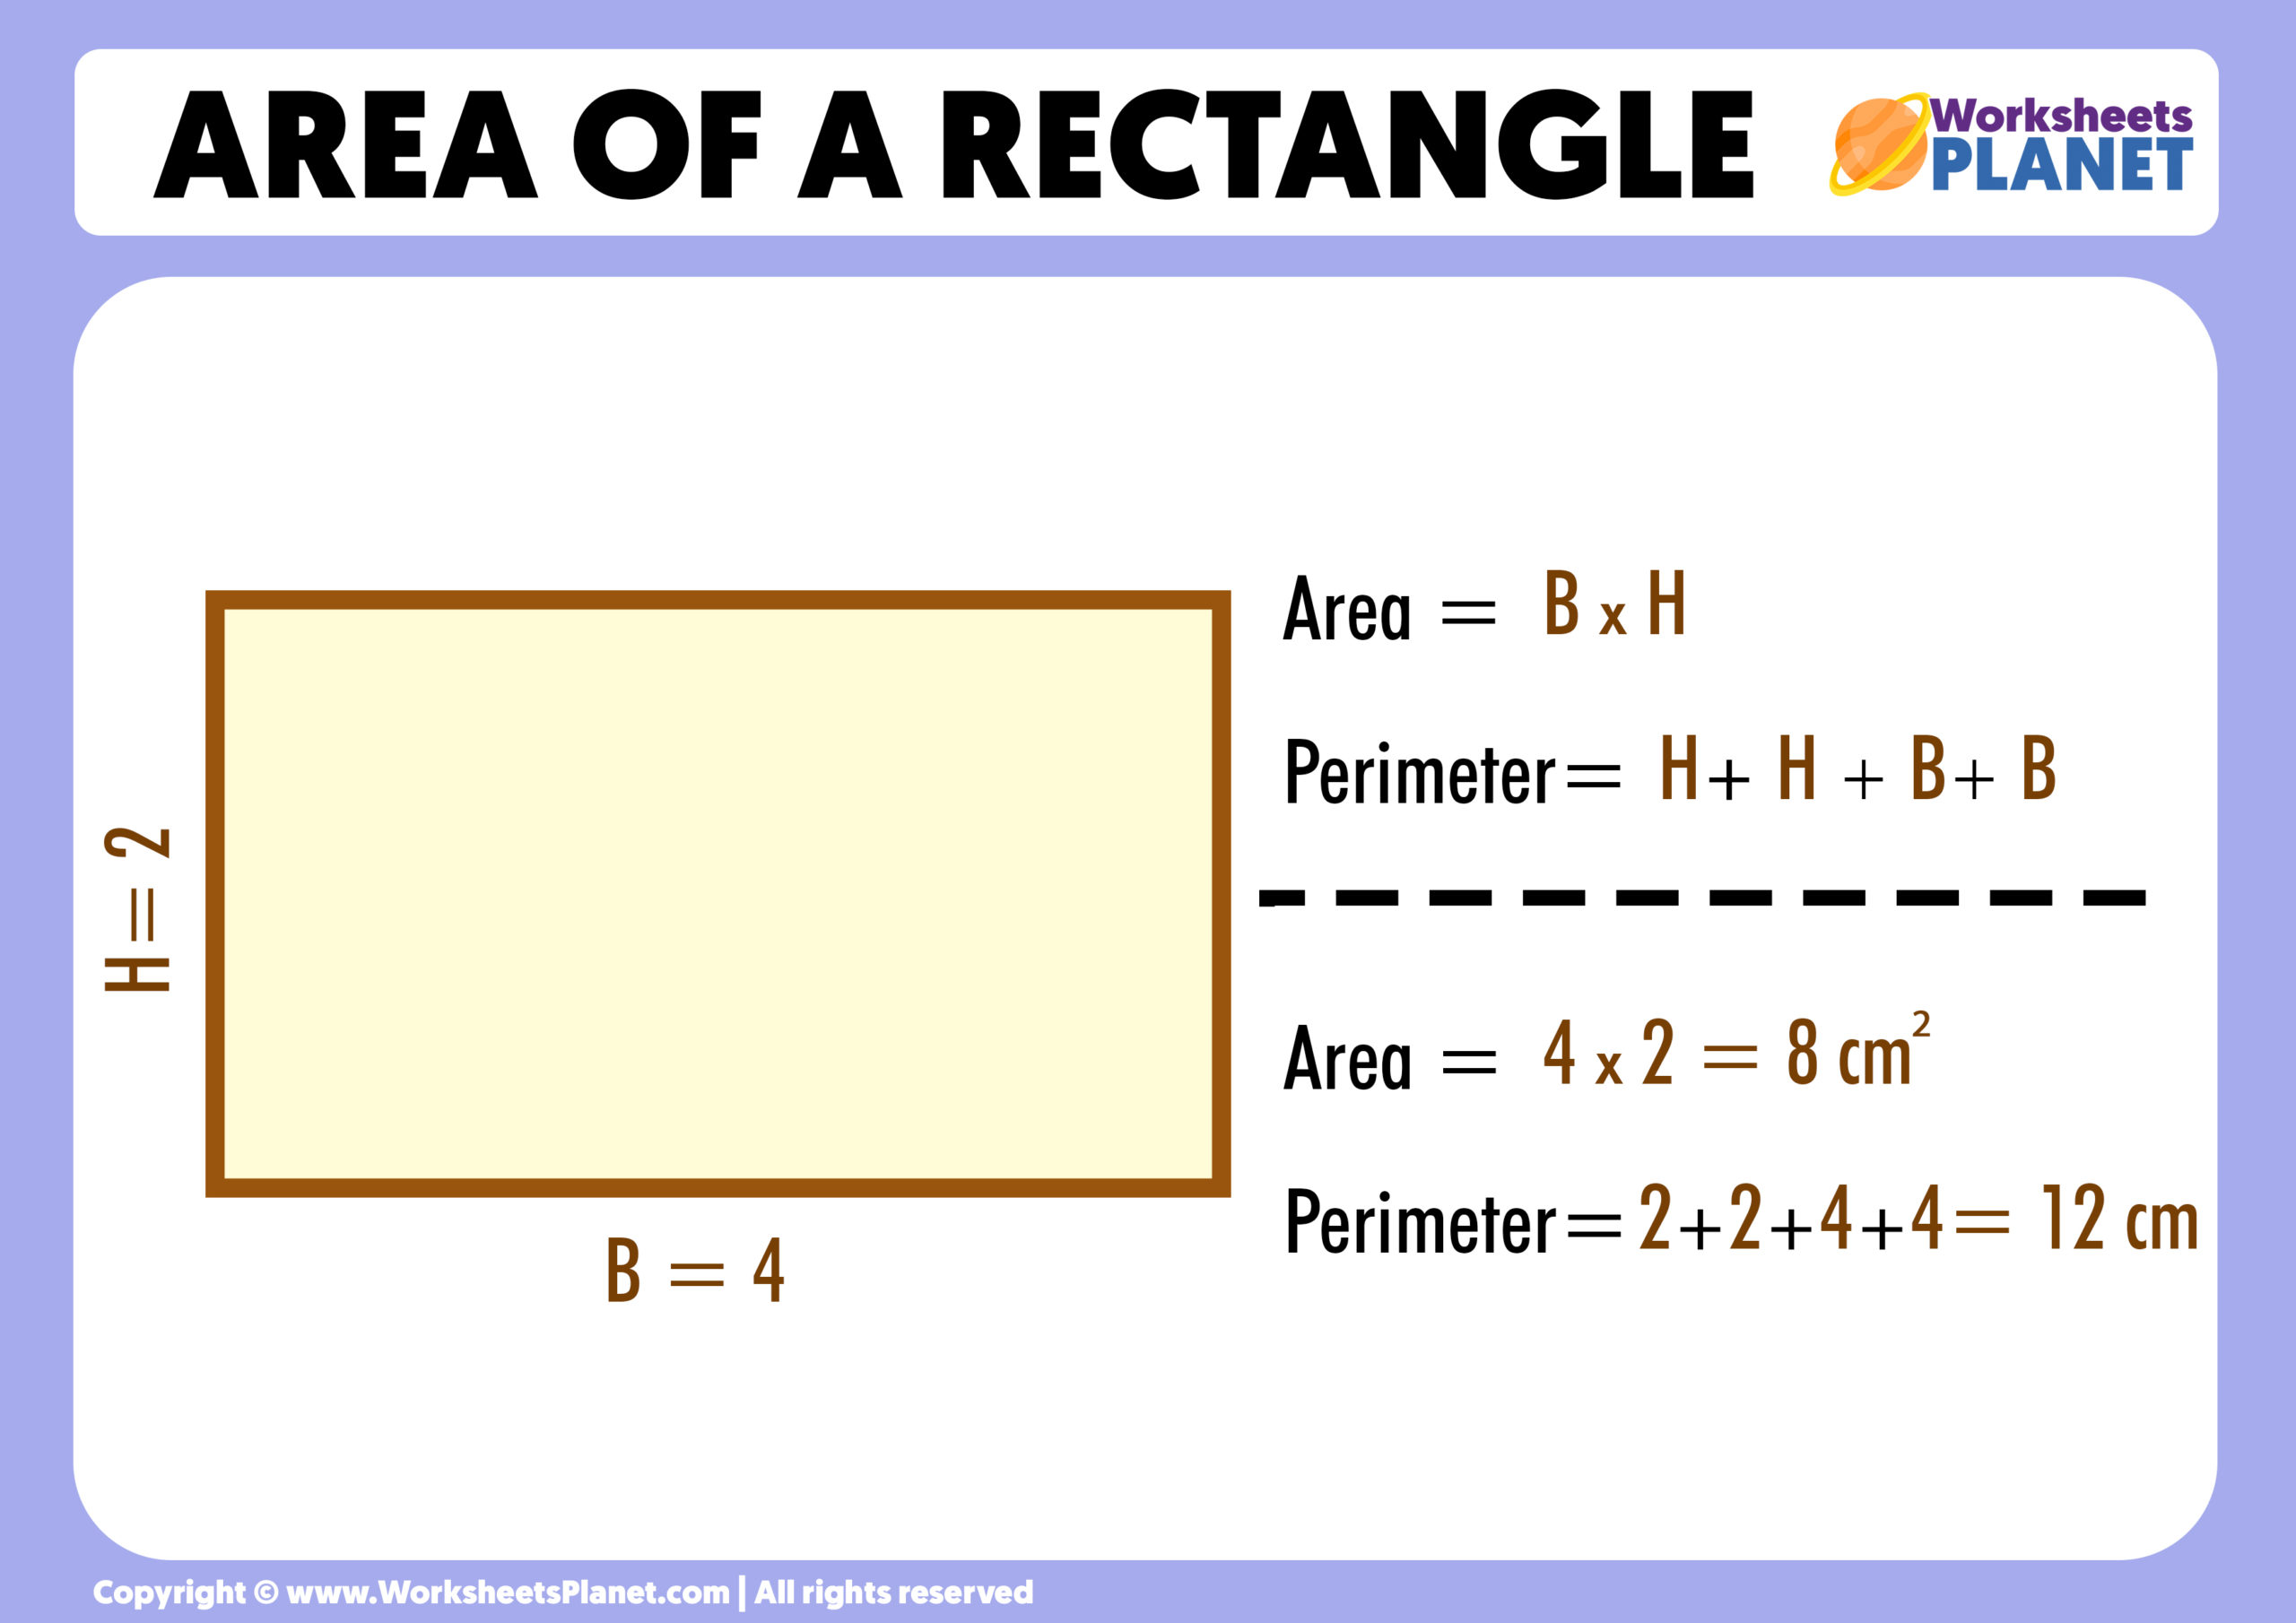 Area of Rectangle - Definition, Formula and Problems